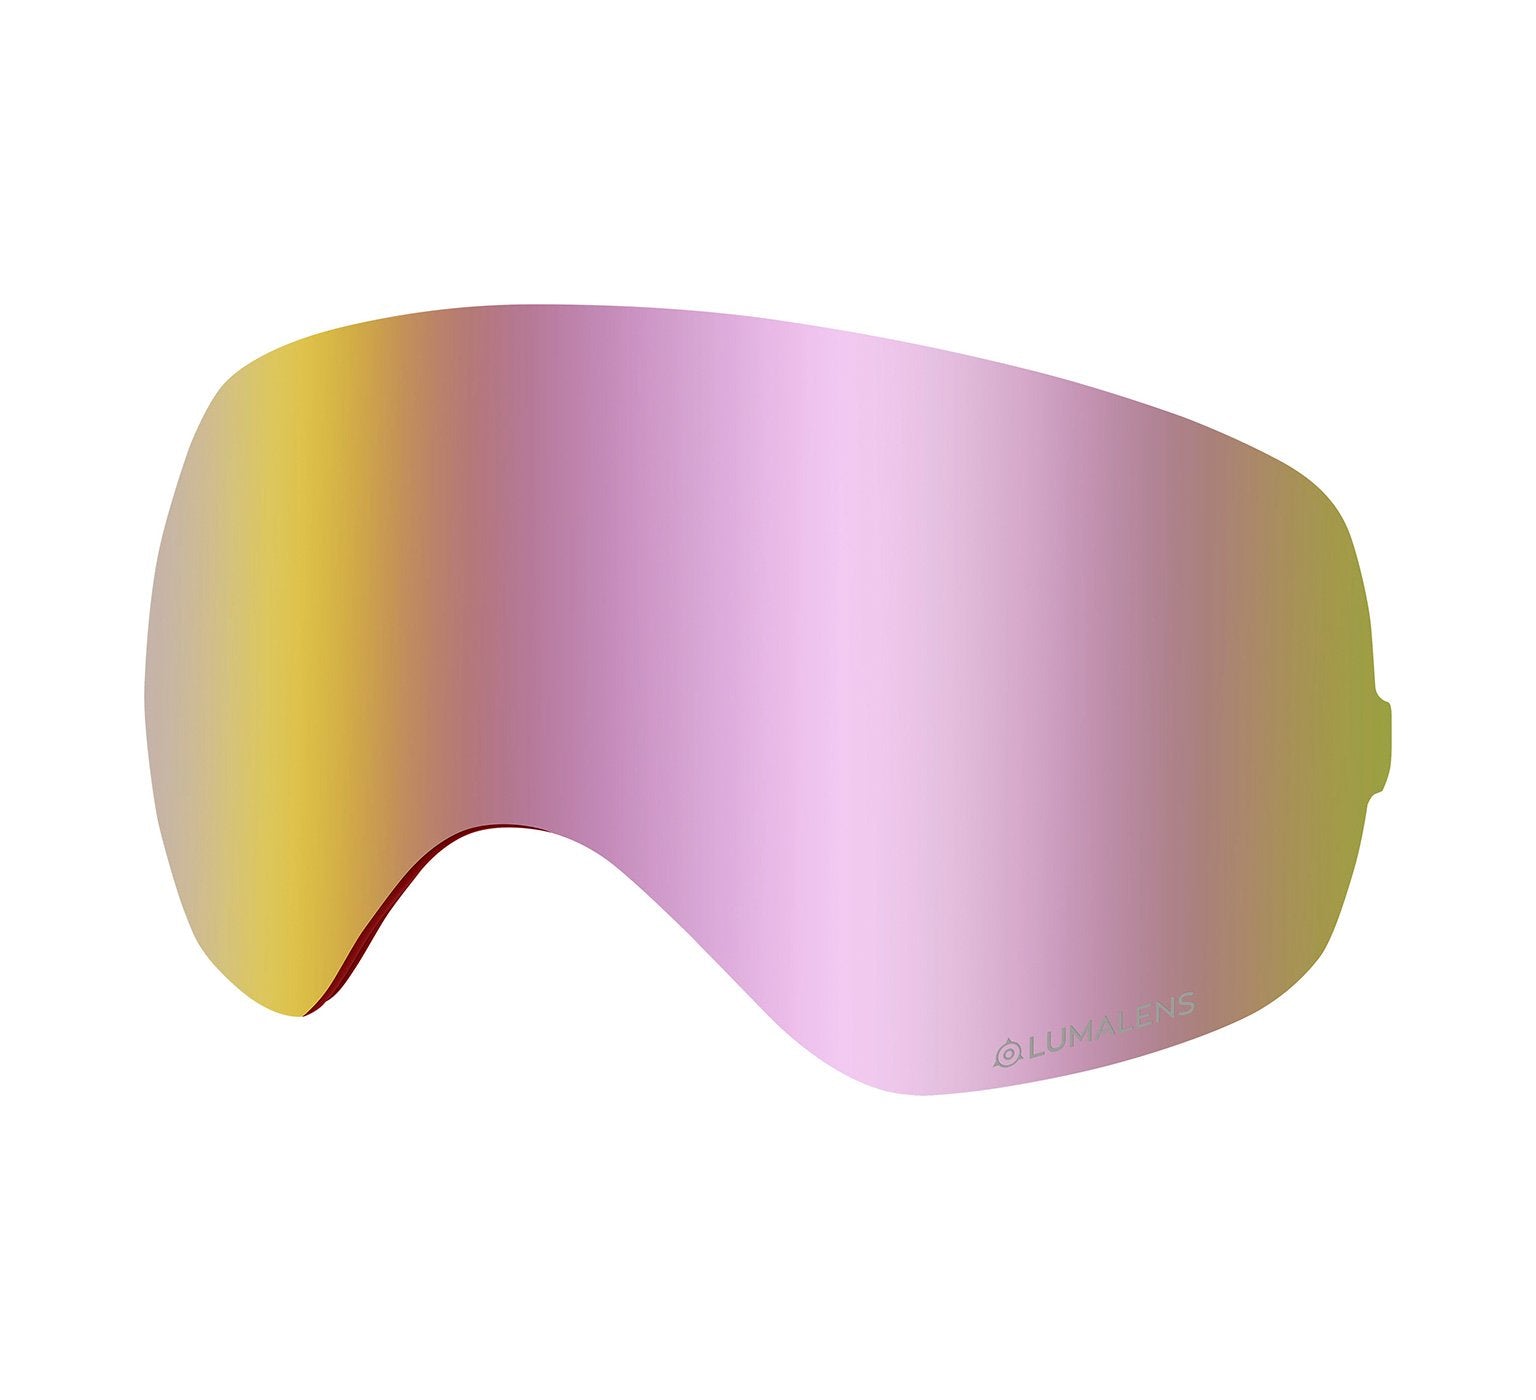 X2s Replacement Lens - Lumalens Pink Ionized